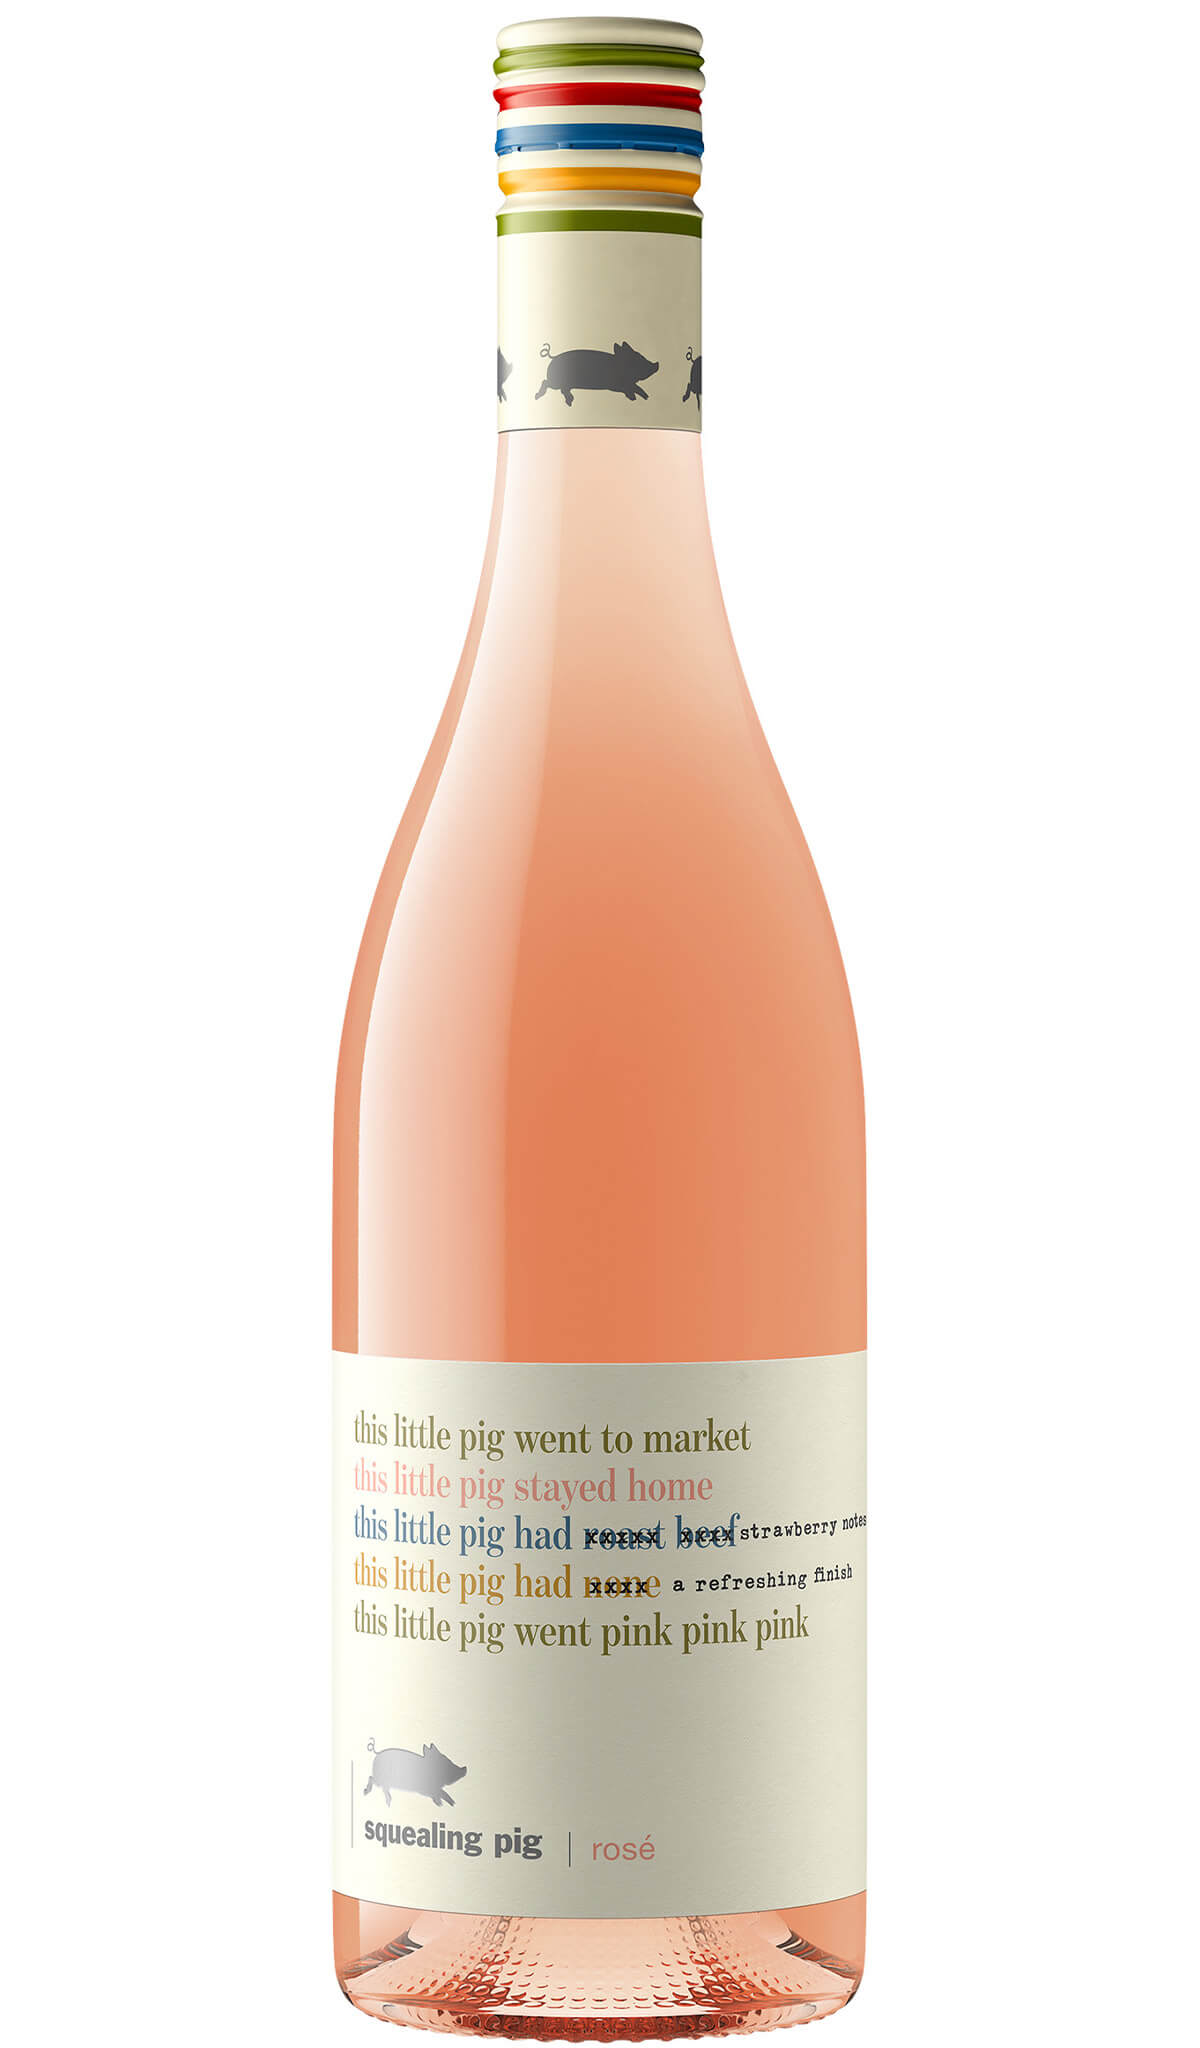 Find out more, explore the range and buy Squealing Pig Rose 2023 (Marlborough) available online at Wine Sellers Direct - Australia's independent liquor specialists.